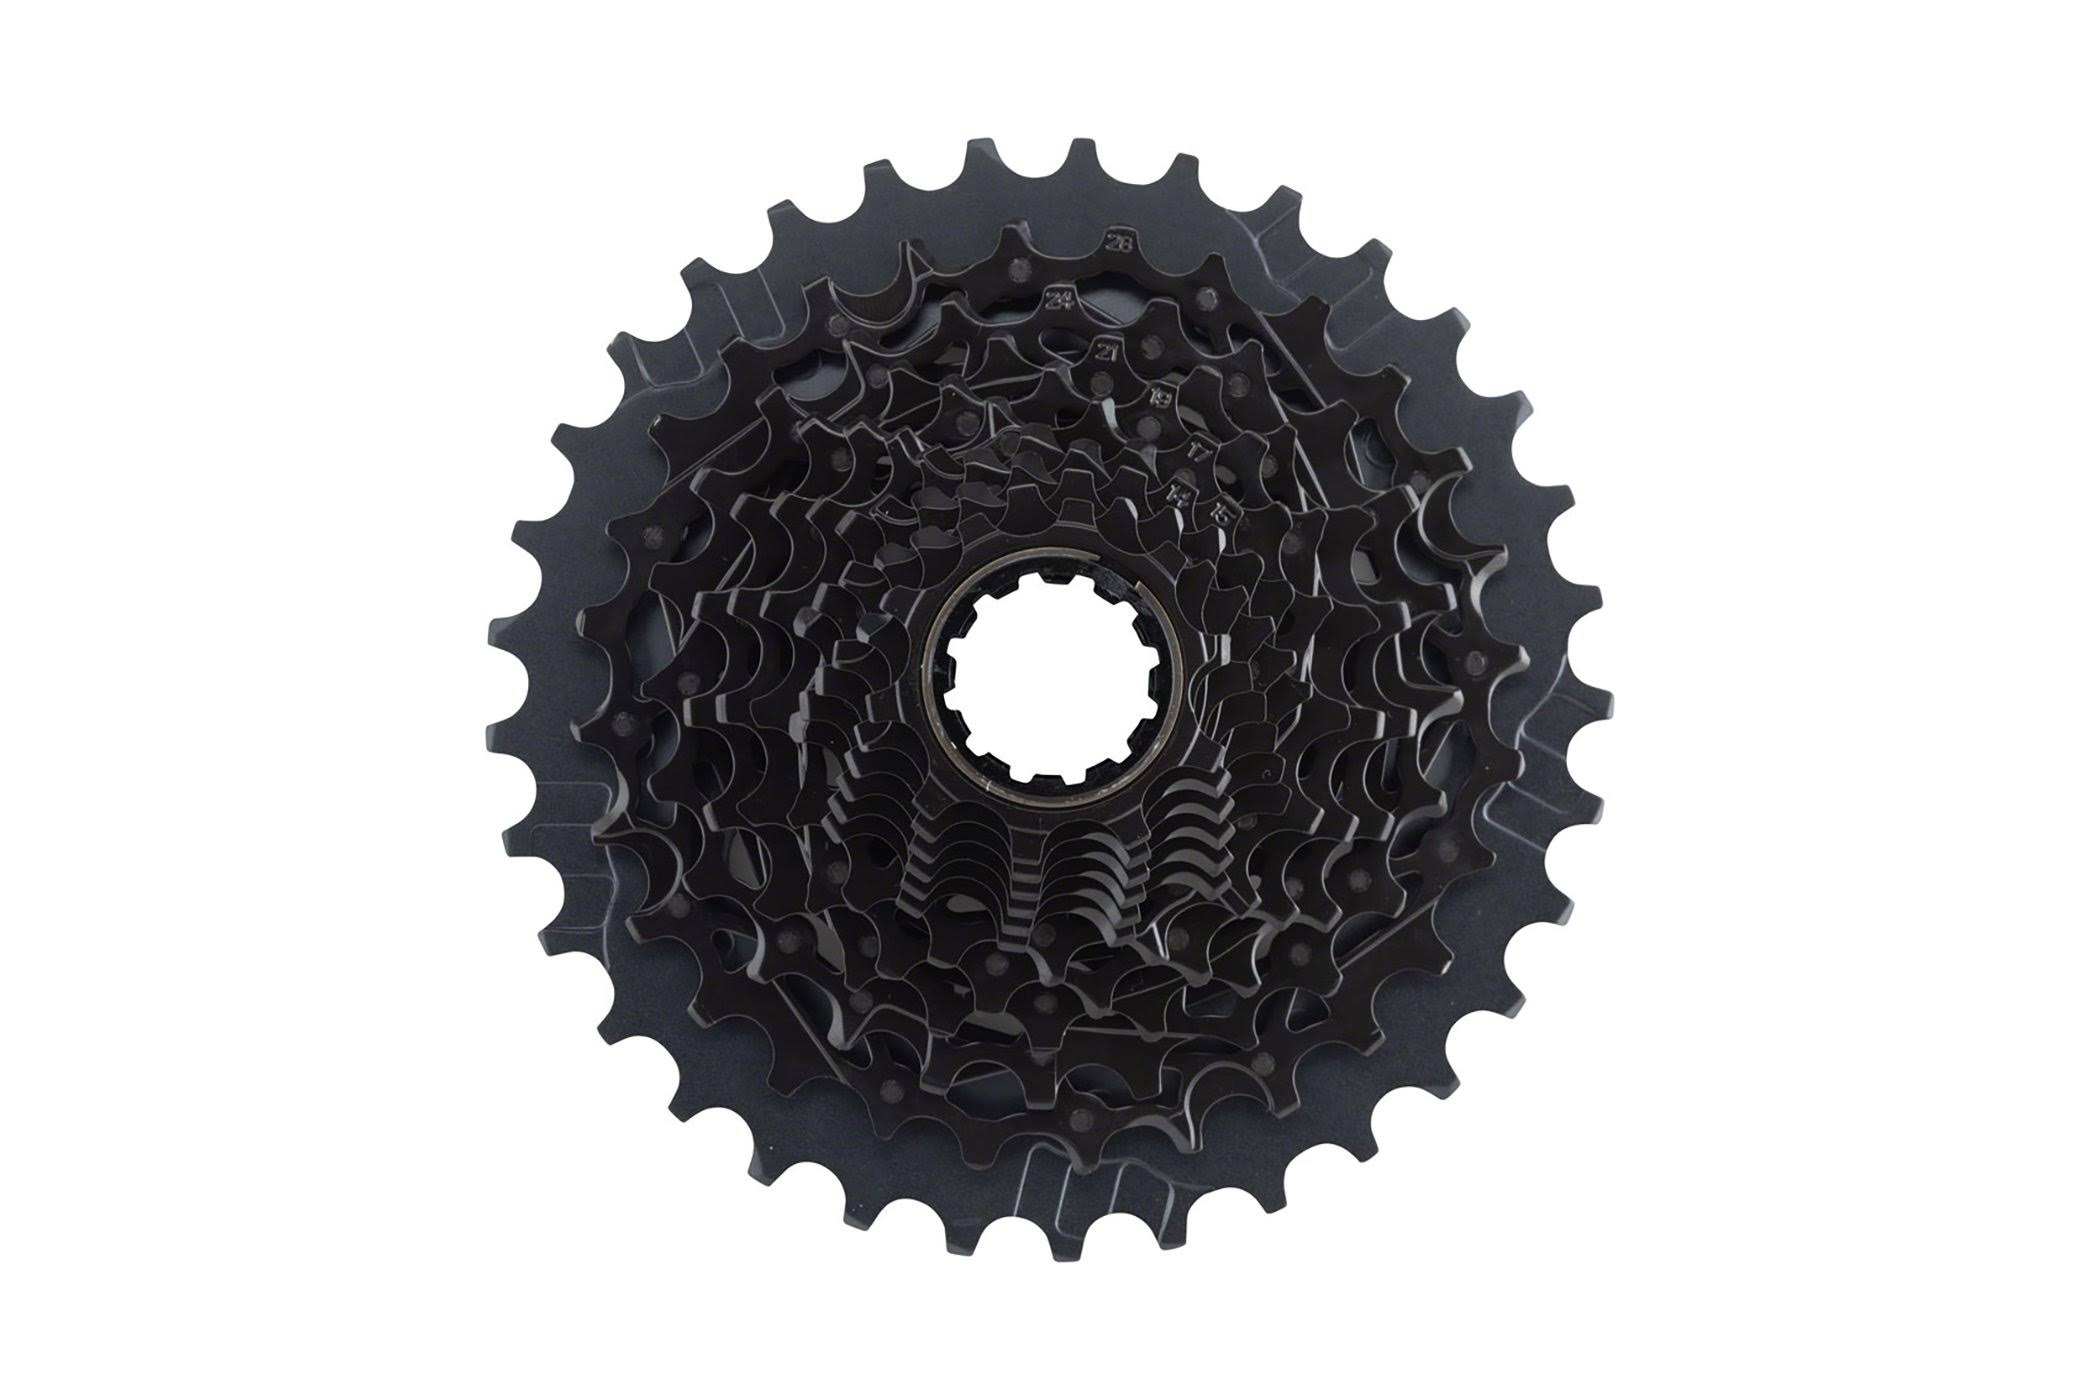 SRAM Force AXS Xg-1270 Cassette for XDR Driver Body - Black, 12 Speed, 10-33t